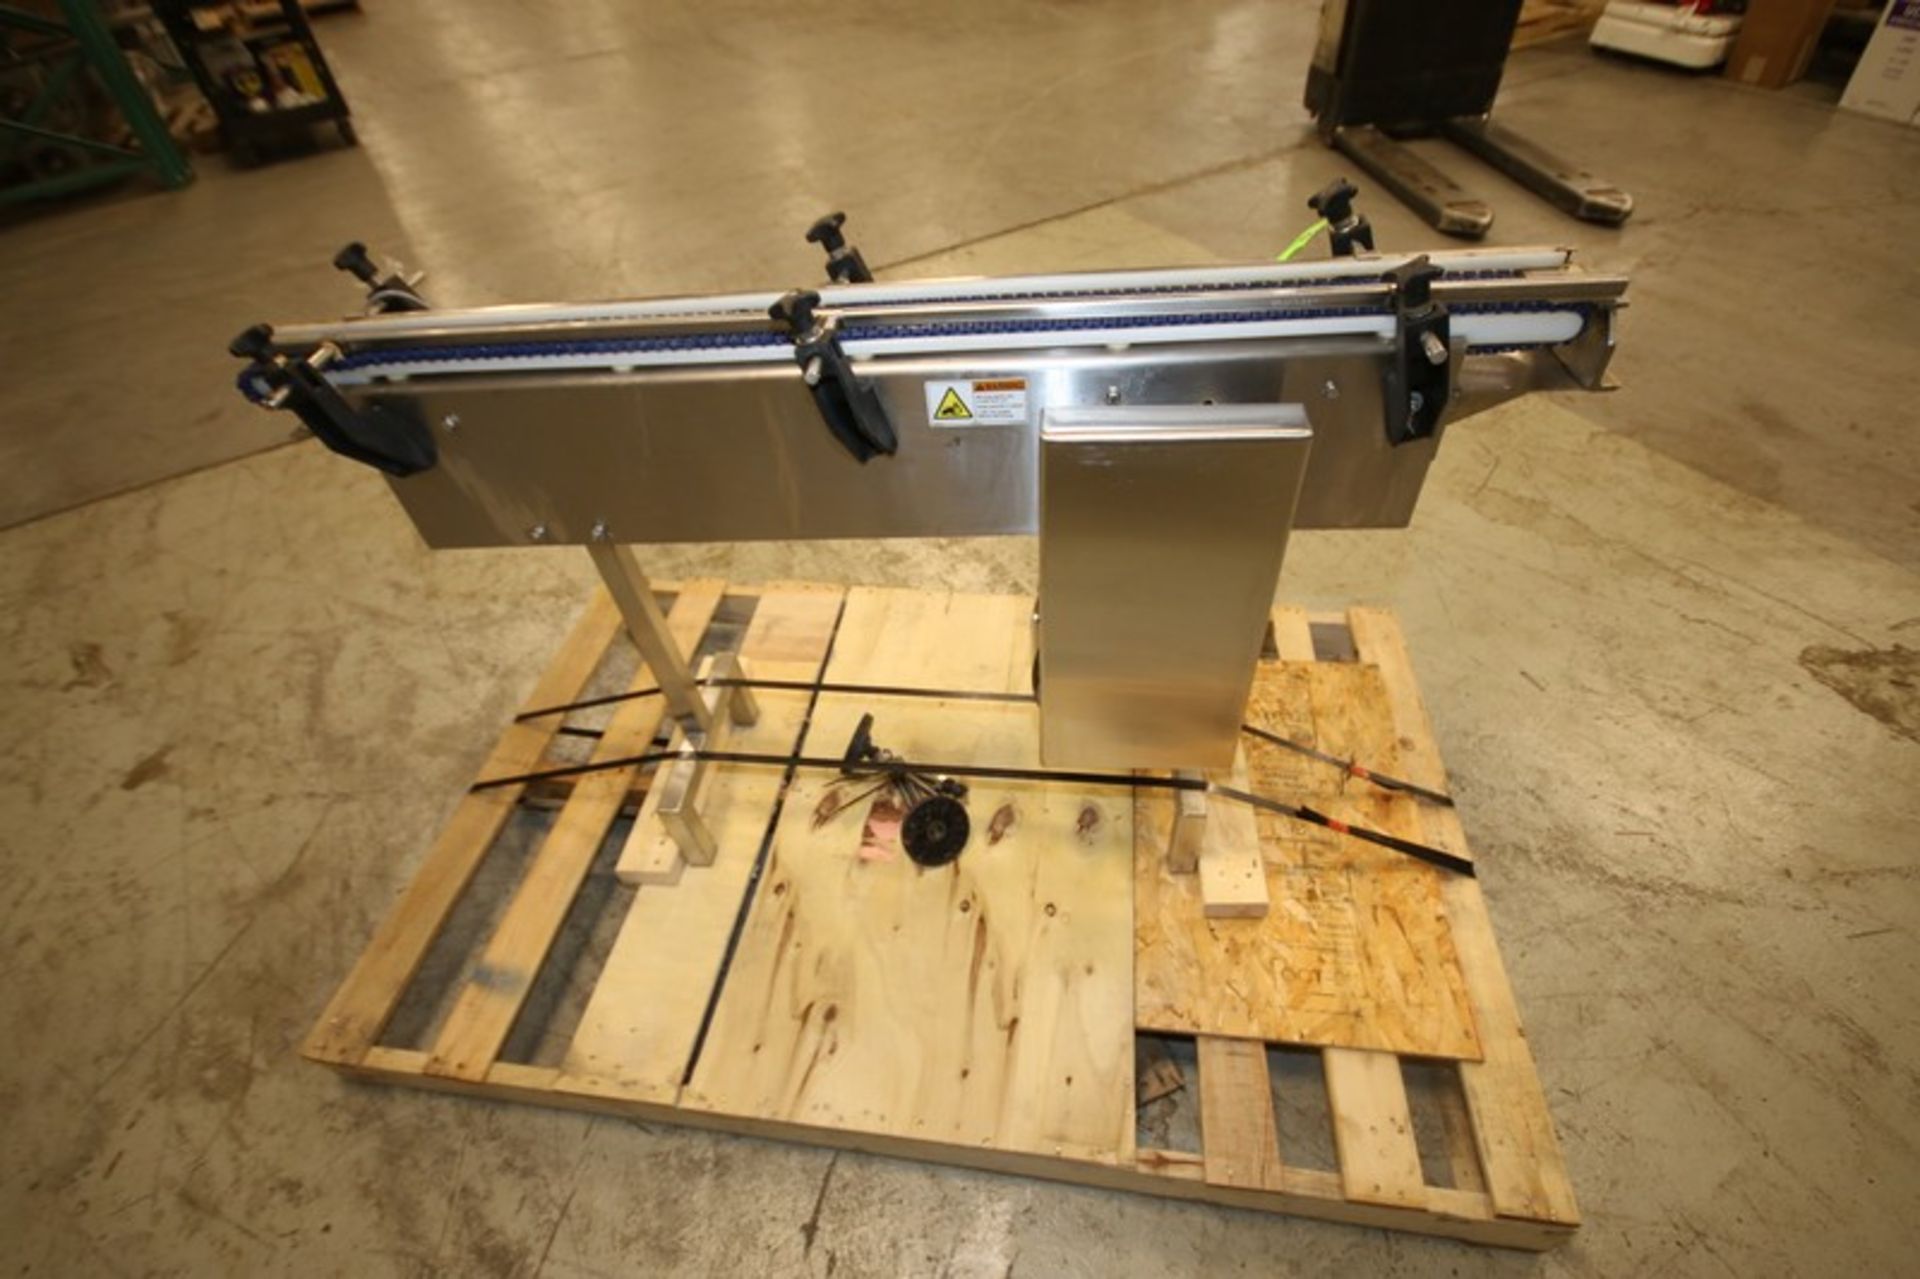 55" L x 31" H S/S Product Conveyor Section with 3" W Intralox Type Plastic Belt, 1/4 hp Drive - Image 4 of 4